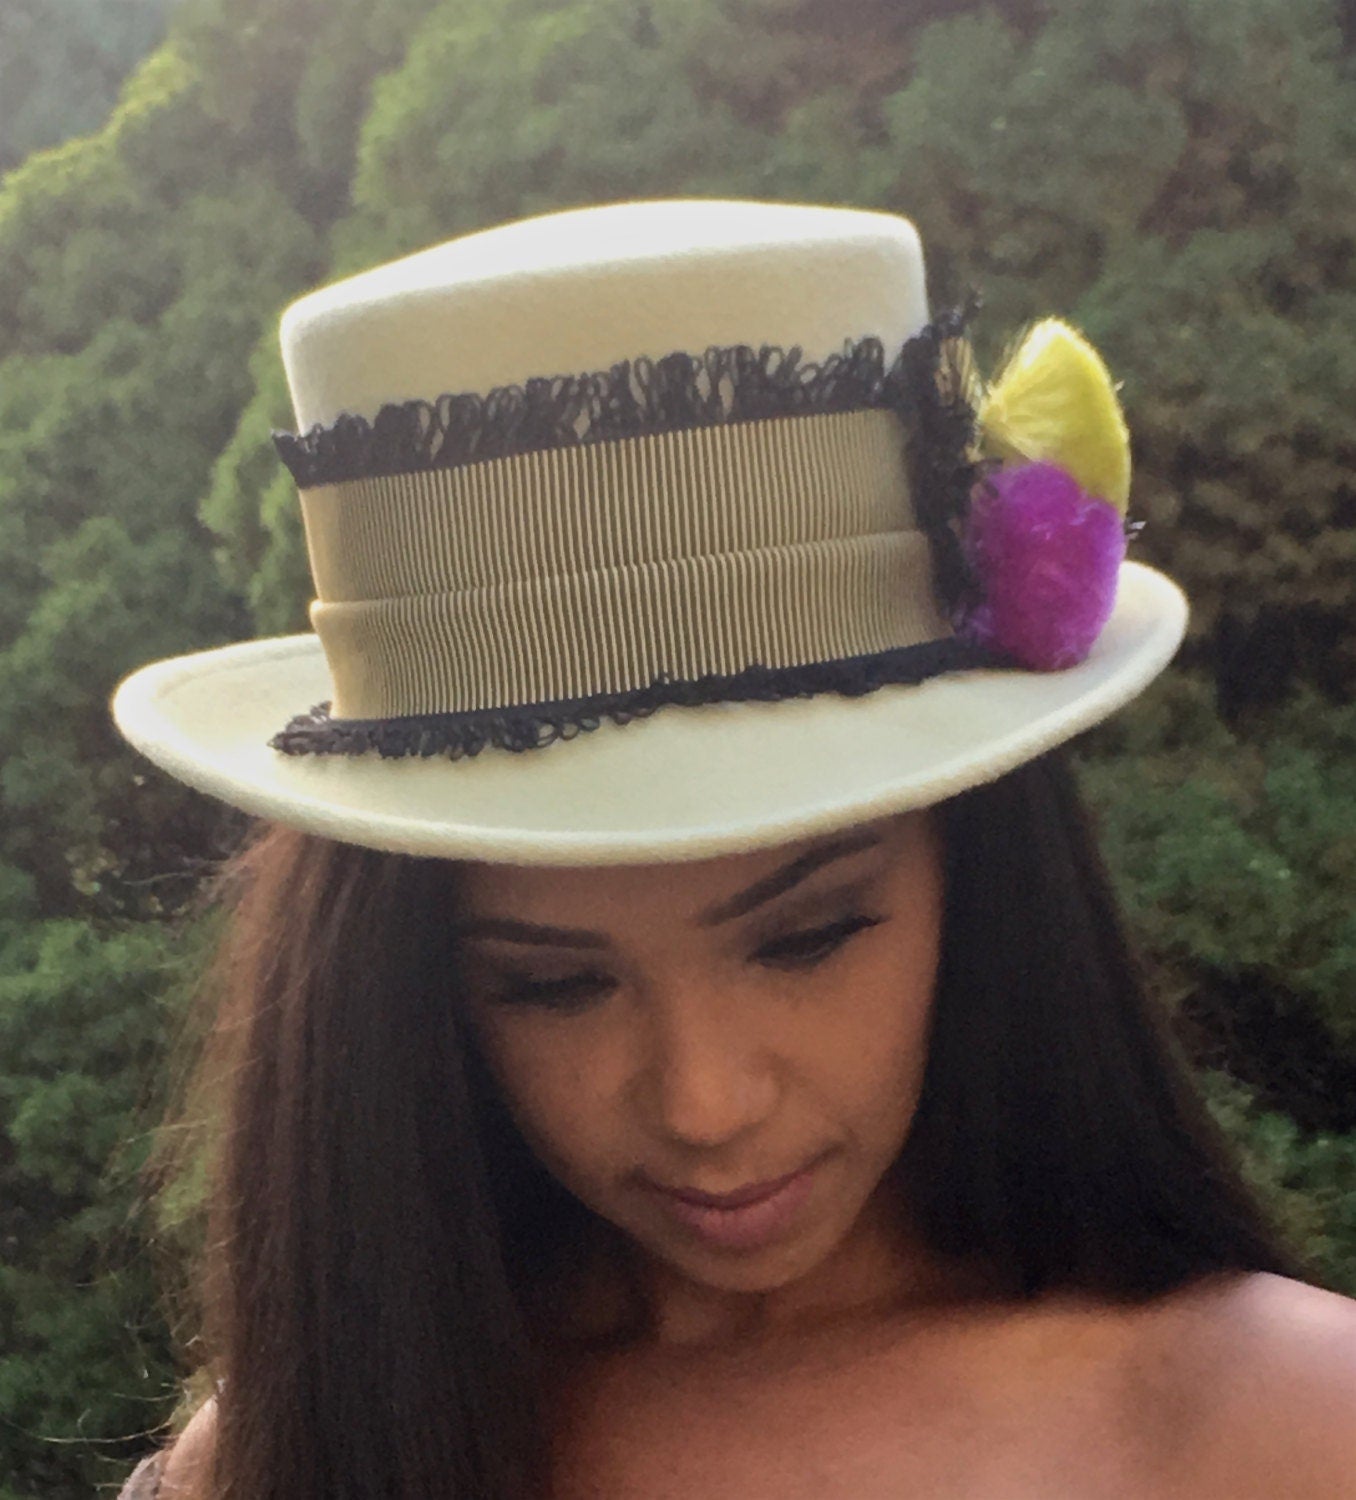 Pale Green Velour Top Hat with silk Pom-Pom's-Winter Races-Polo-Weddings-Bridal-Birthday-Holiday-Thanksgiving-Church ... any fun event !!!!